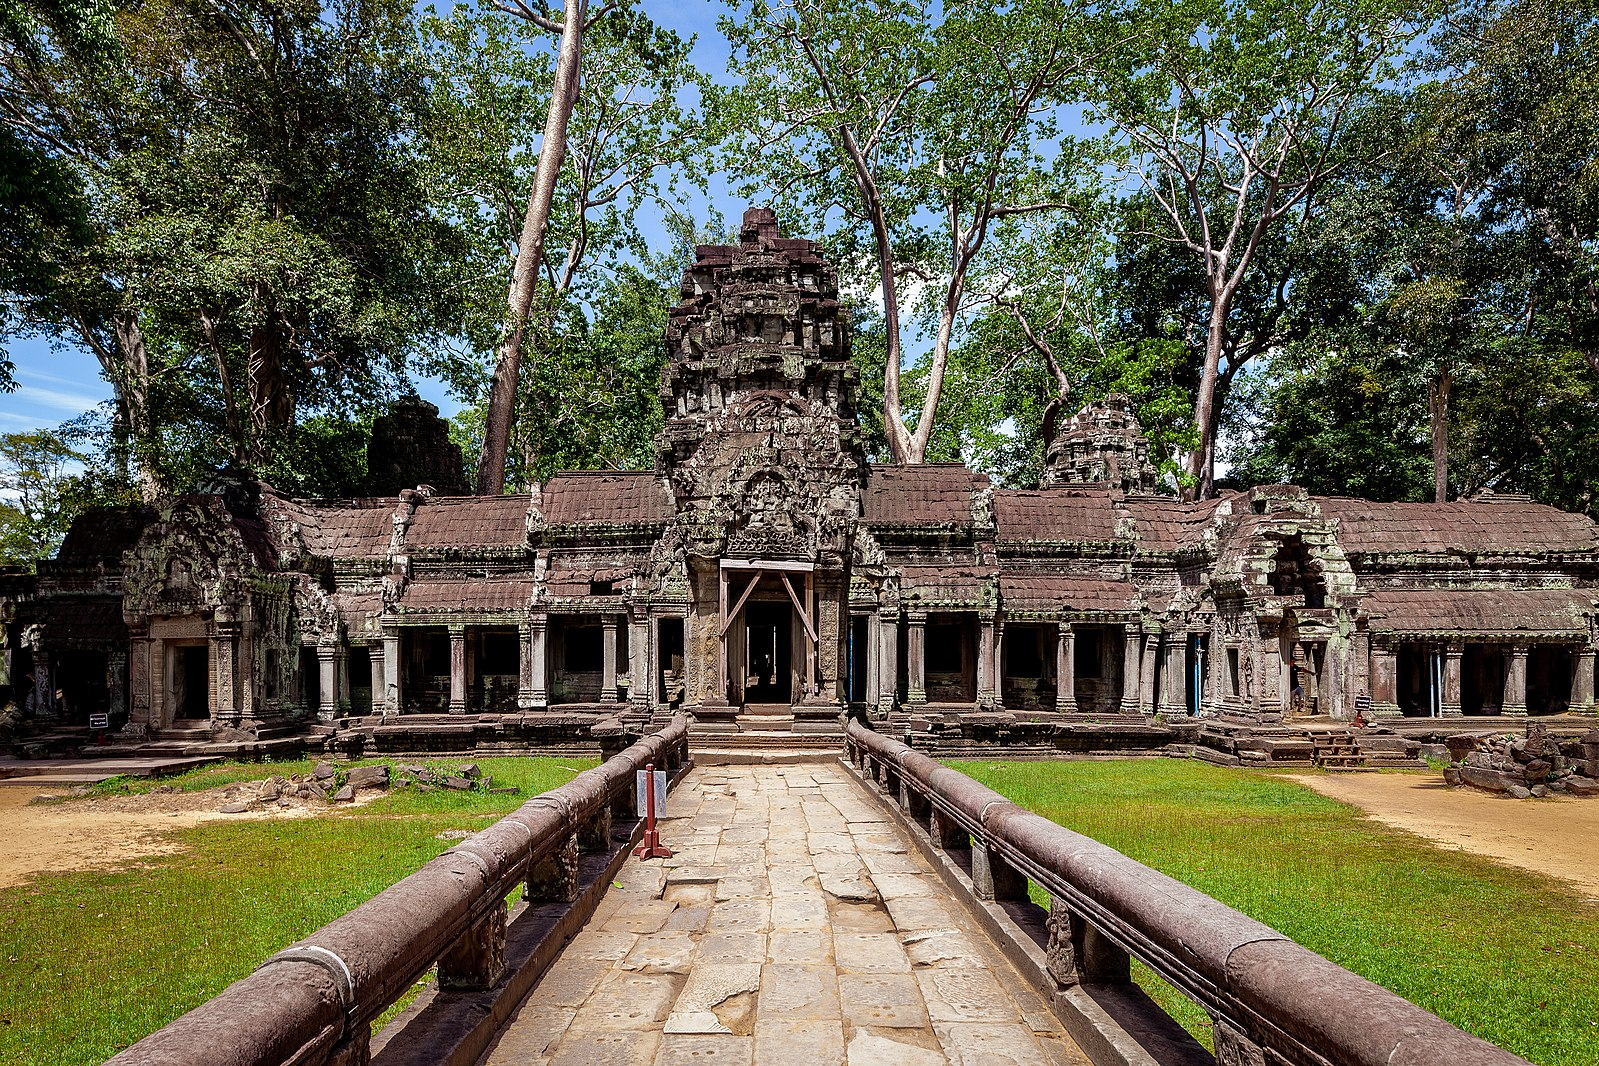 Ta Prohm temple is one of Siem Reap’s cultural attractions